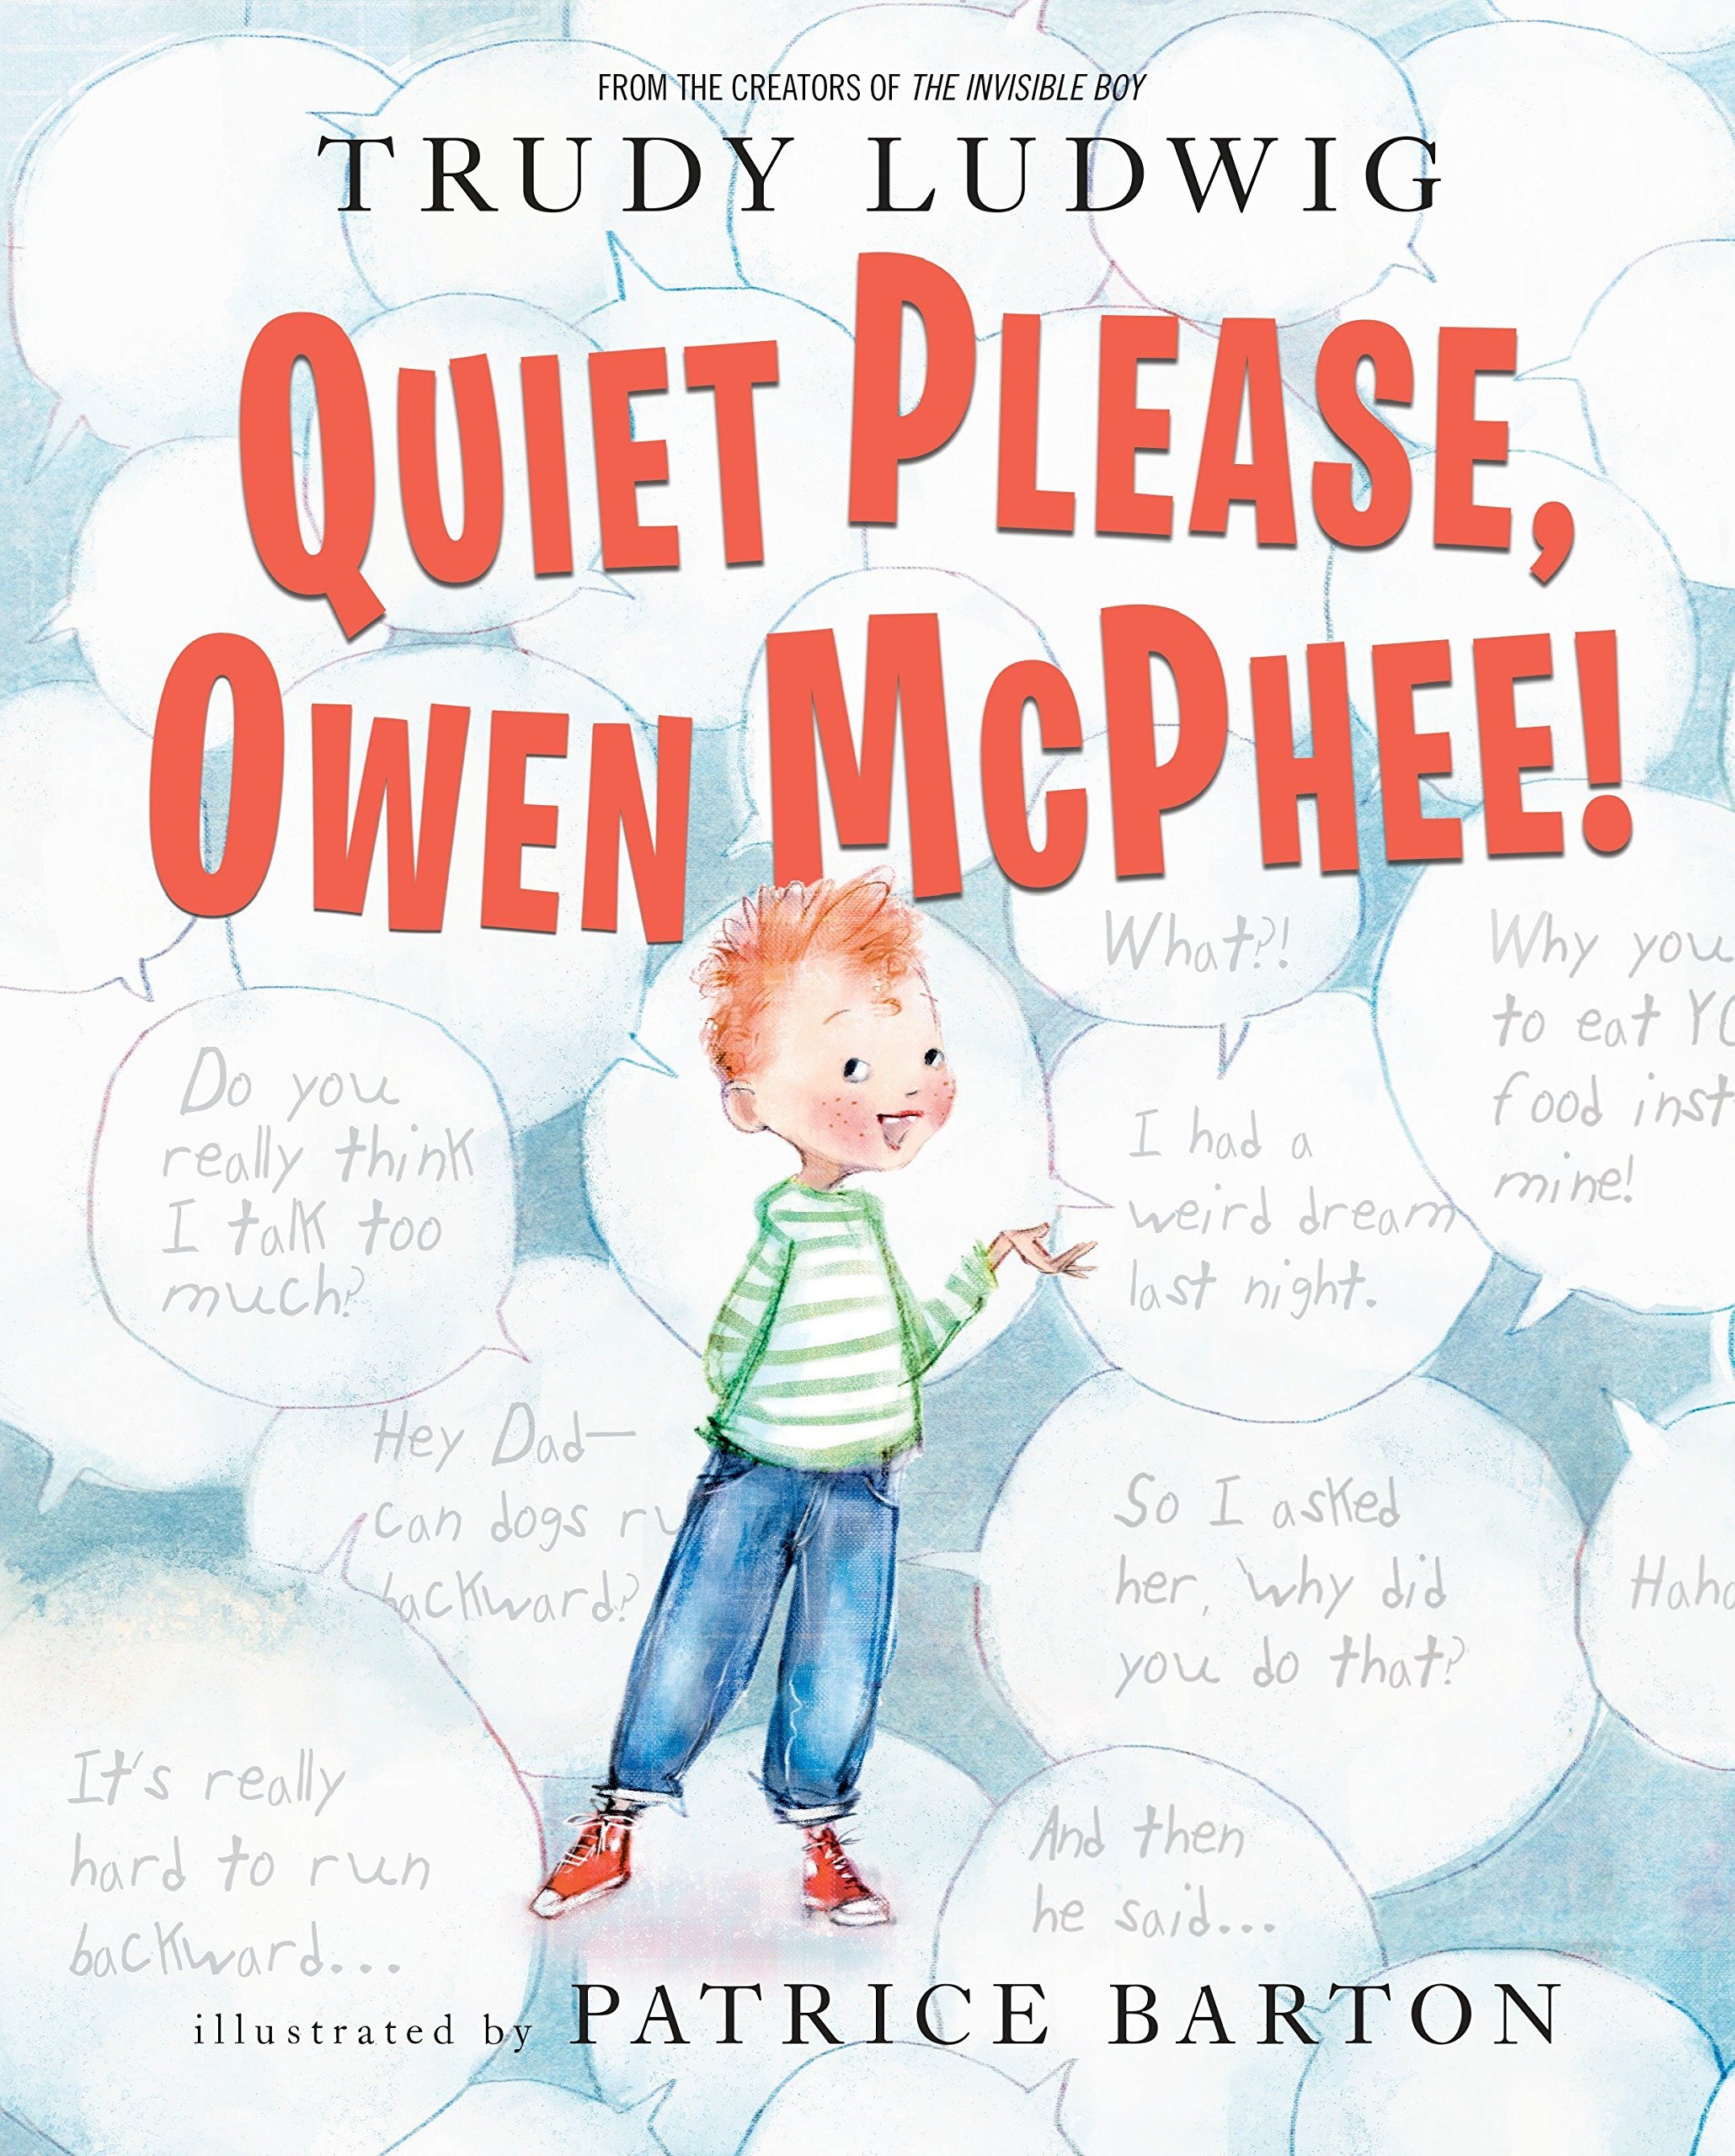 Quiet Please, Owen McPhee! – Trudy Ludwig (connections to being a good listener) 